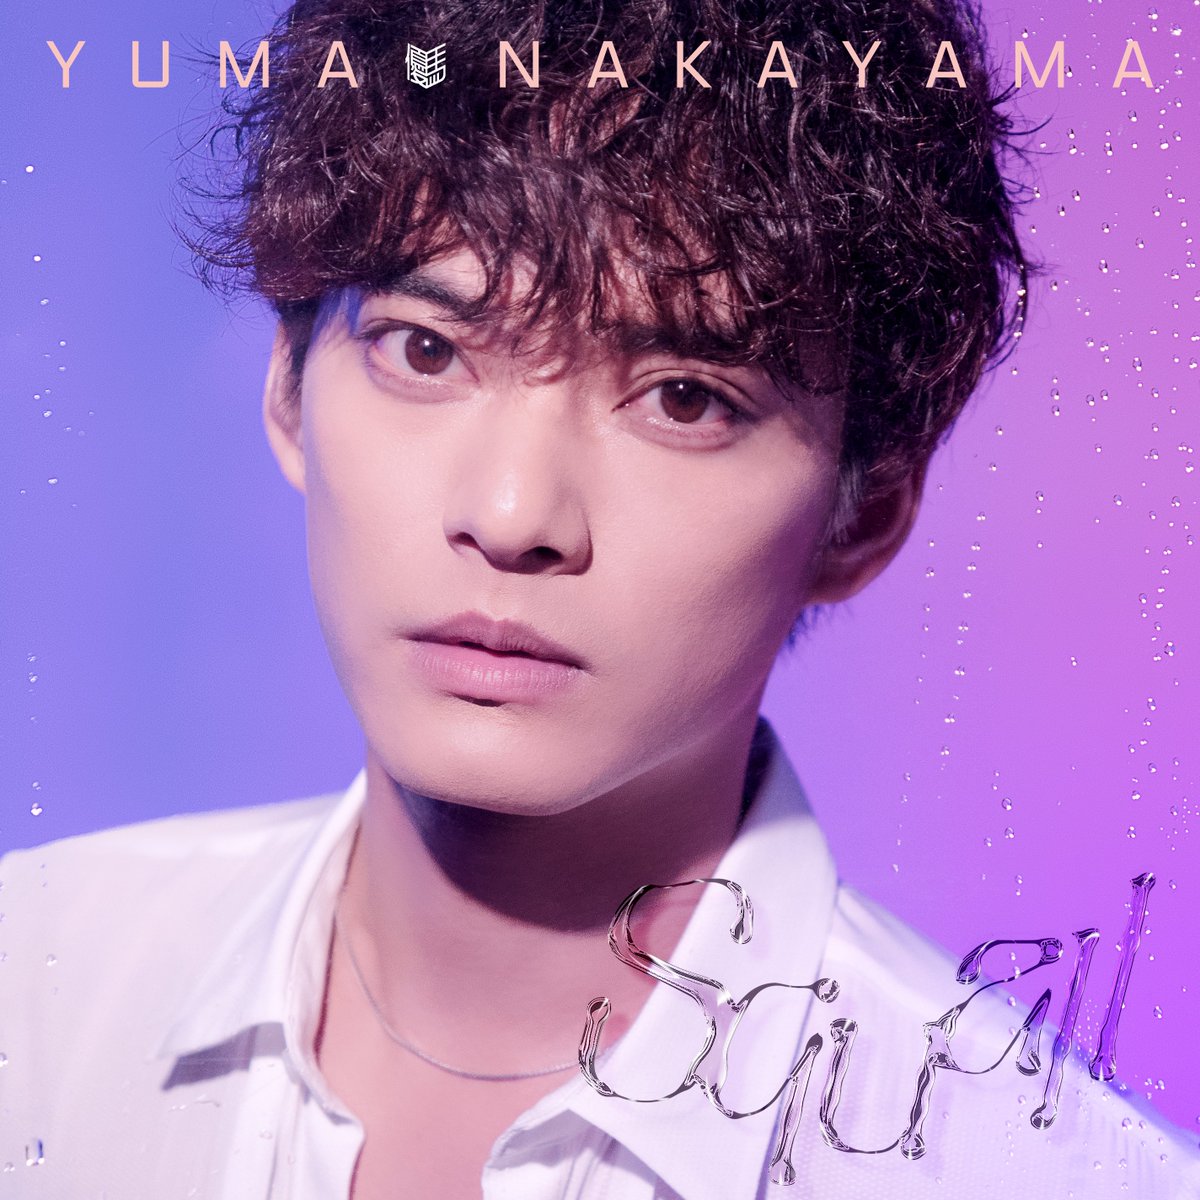 Yuma Nakayama's NEW SINGLE #Squall - OUT NOW 🎵Download/Stream It Here! yumanakayama.lnk.to/Squall ＊Certain territories may be delayed by a few hours #中山優馬10thAnniv #YourJohnnysMusic Follow @yuma_10thAnniv for more!